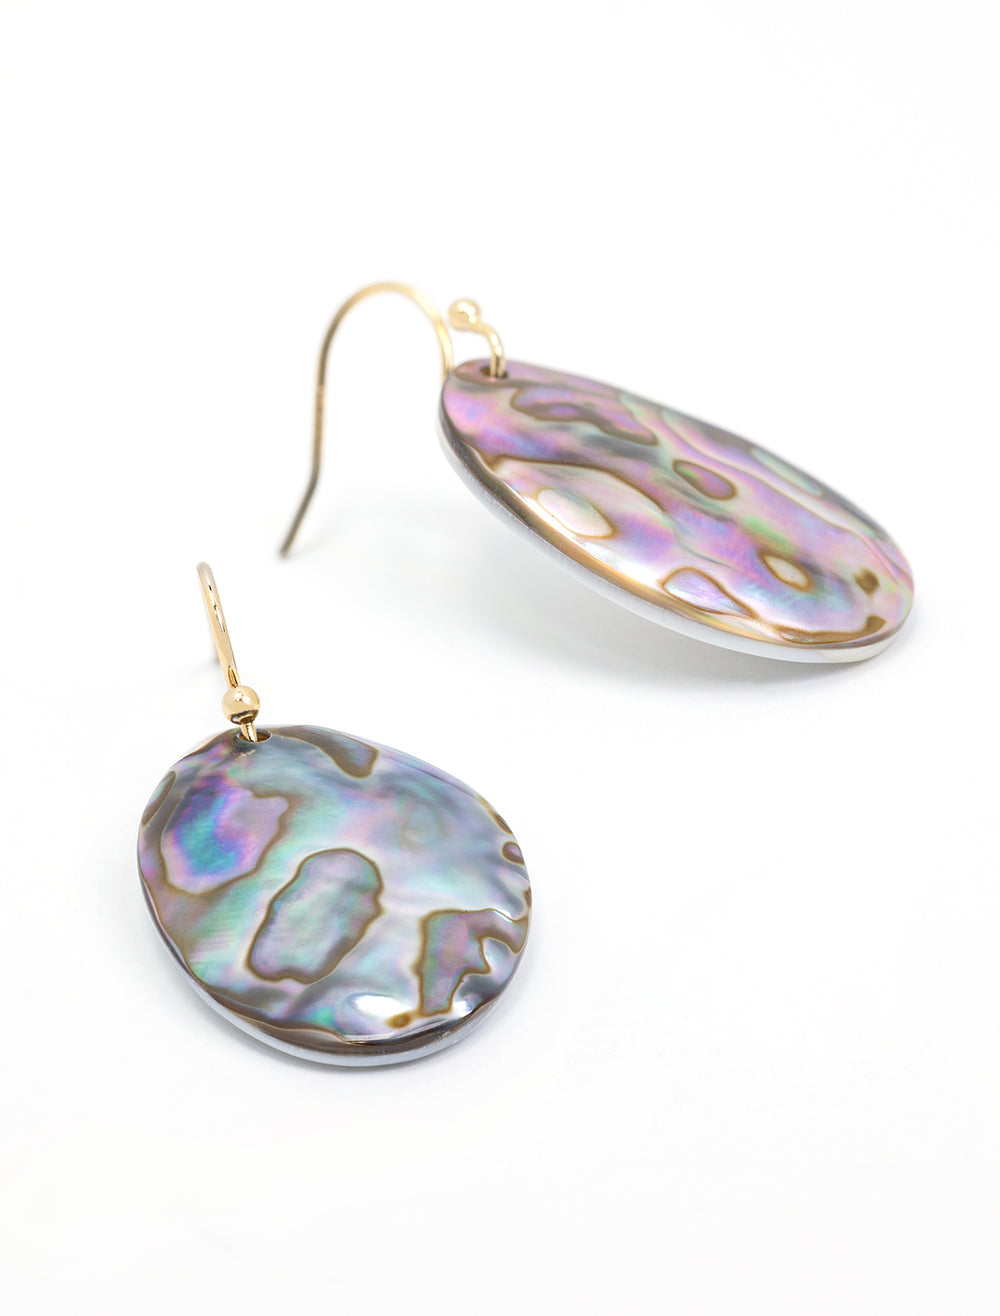 Close-up view of AV Max's organic abalone and mother of pearl earrings.